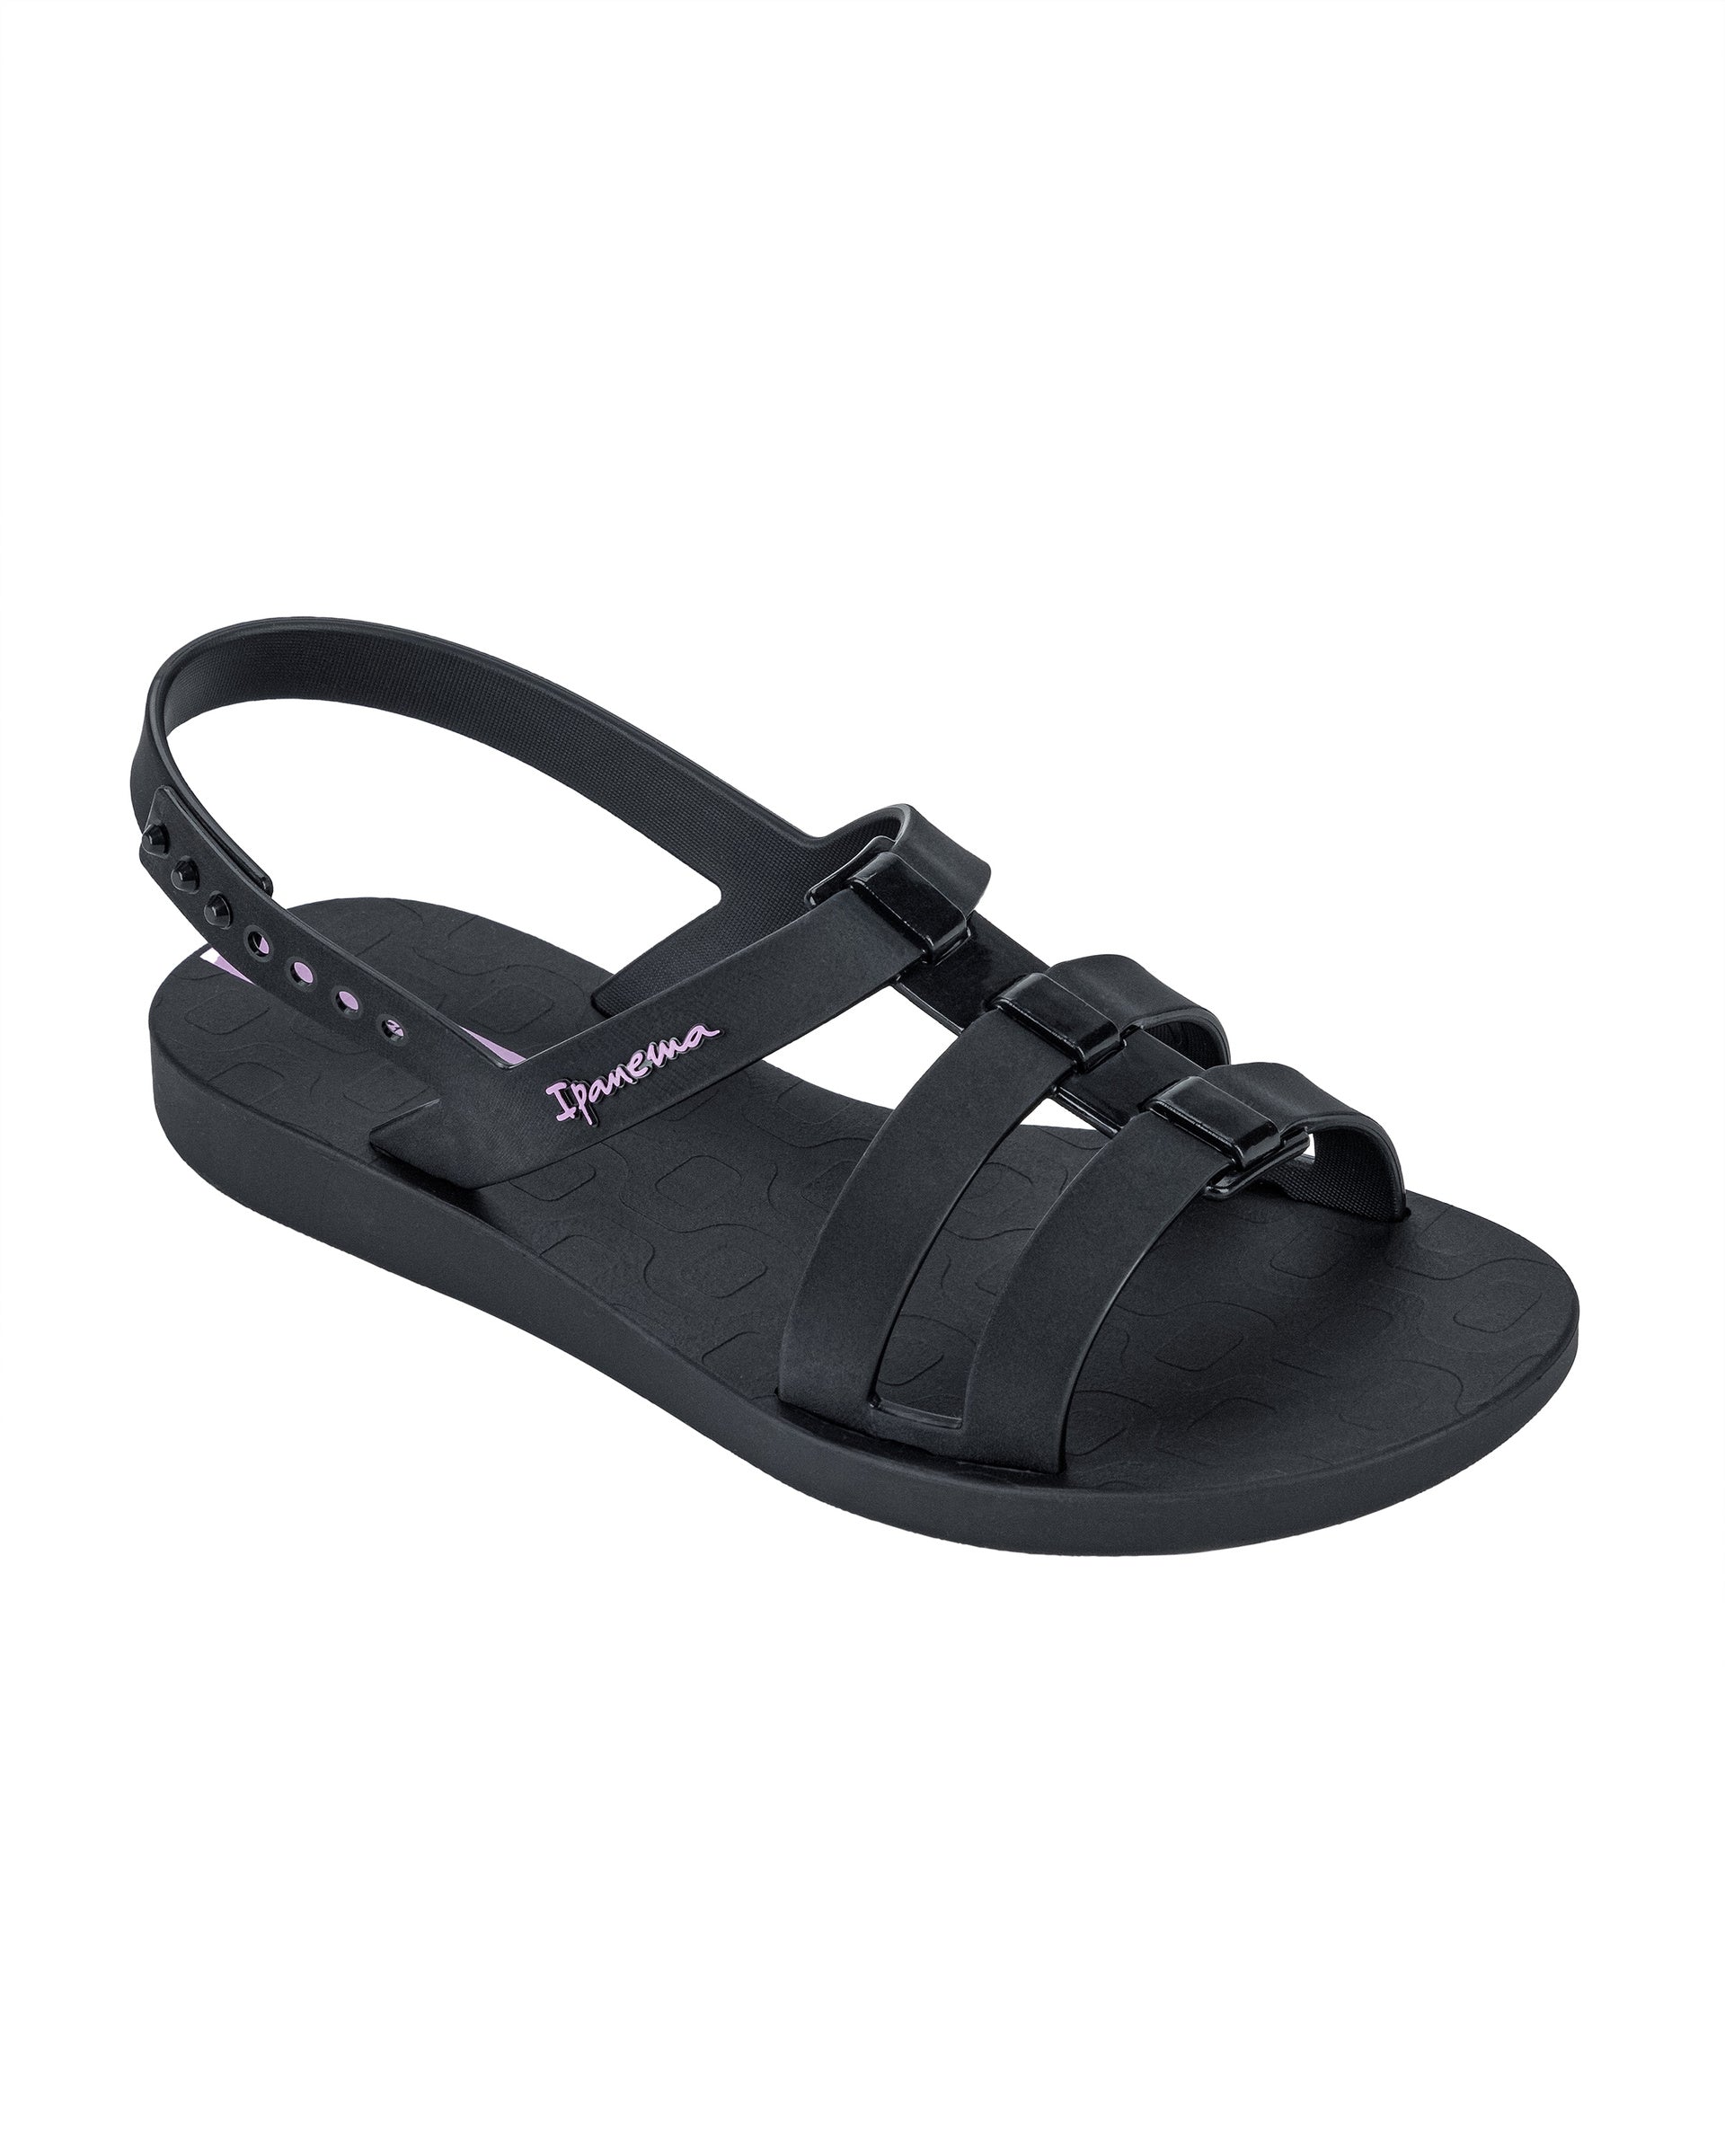 Angled view of a black Ipanema Class Go women's sandal.